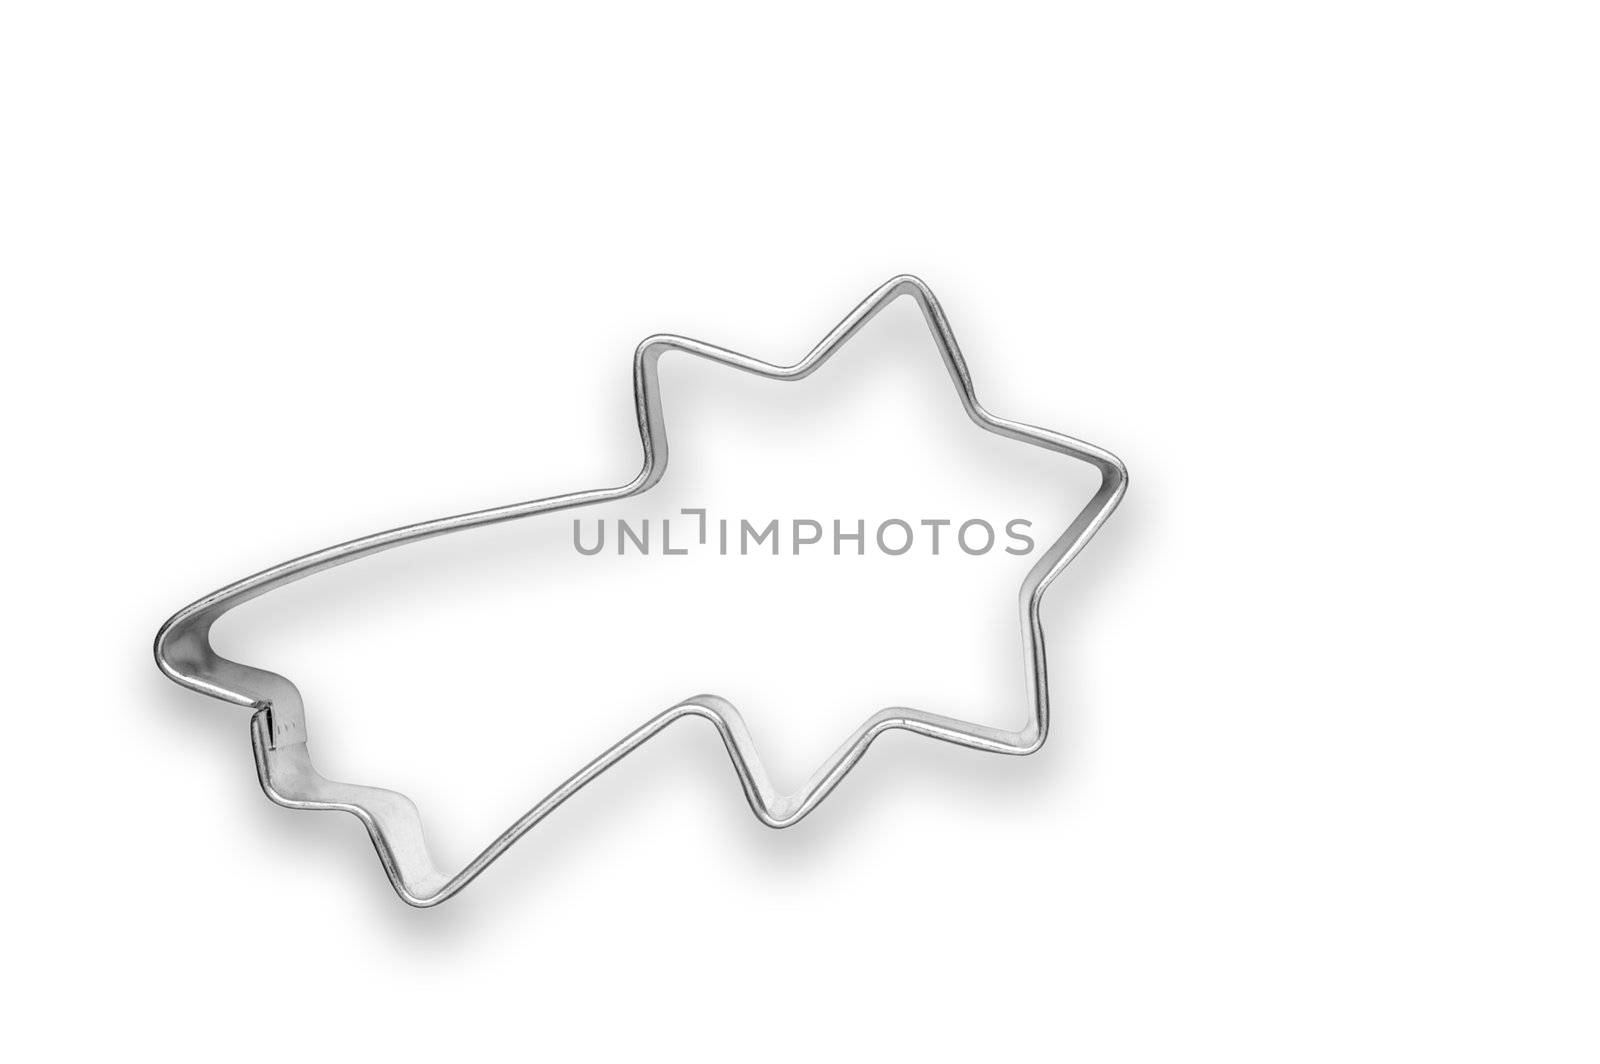 Comet shaped cookie cutter with clipping path